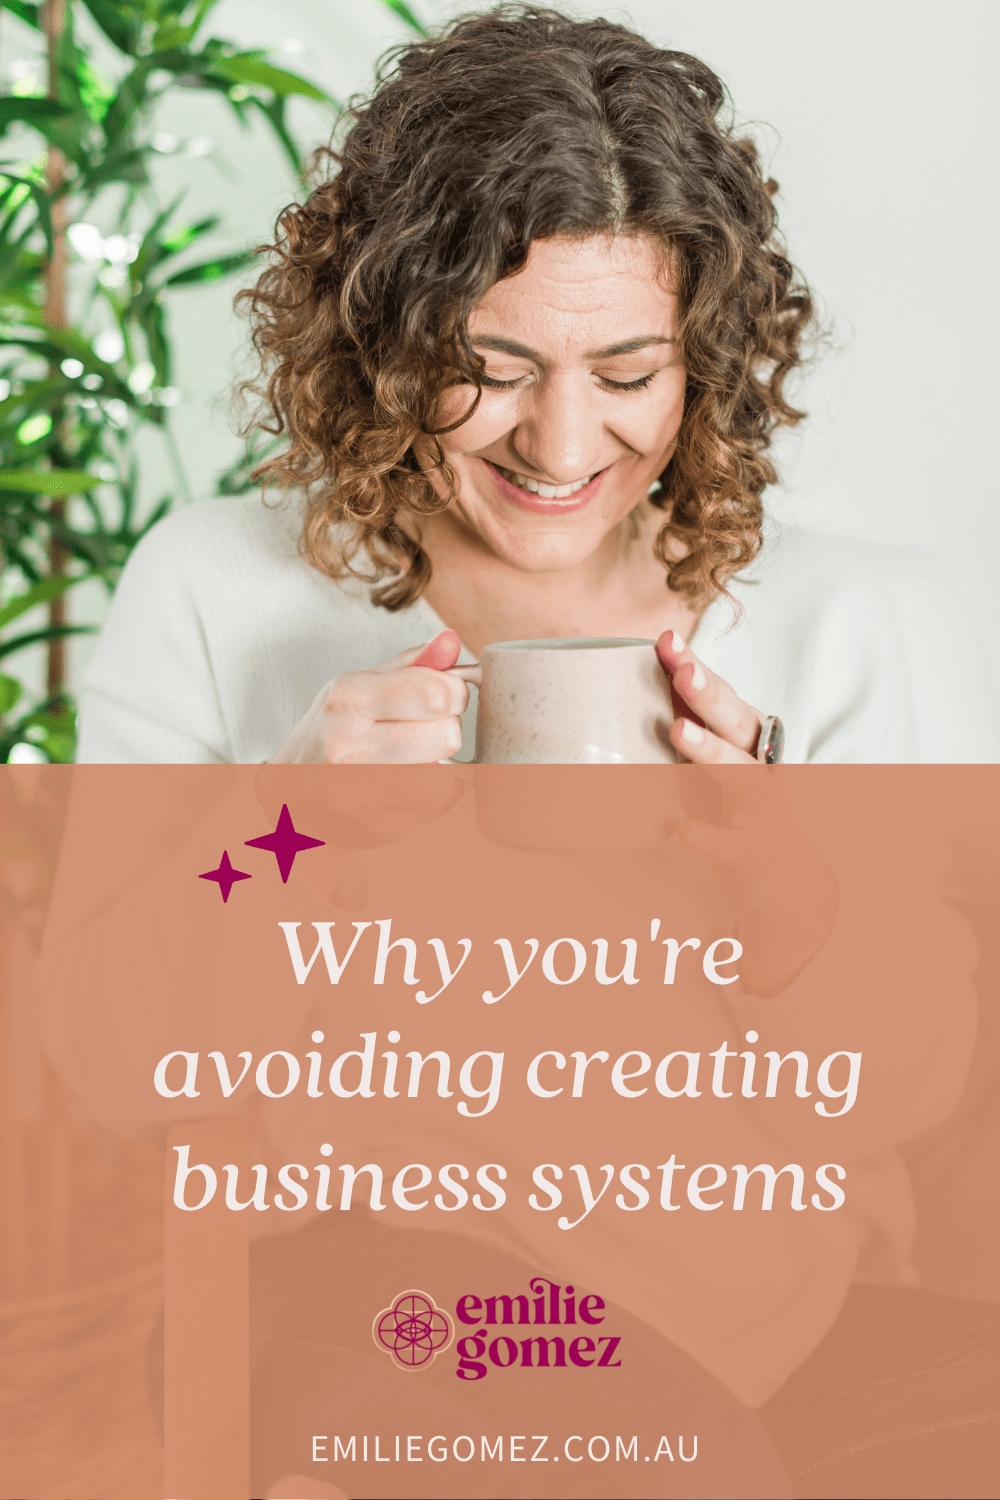 You know you *should* have better business systems as an online entrepreneur but you’re avoiding having to deal with setting up proper systems & workflows. Having good business management using business systems & tools makes sense, so what keeps holding you back? My guess is that you fall into one (or all!) of the 3 main reasons I see successful solopreneurs avoid creating better business systems. Click through to find out which category you fall into!